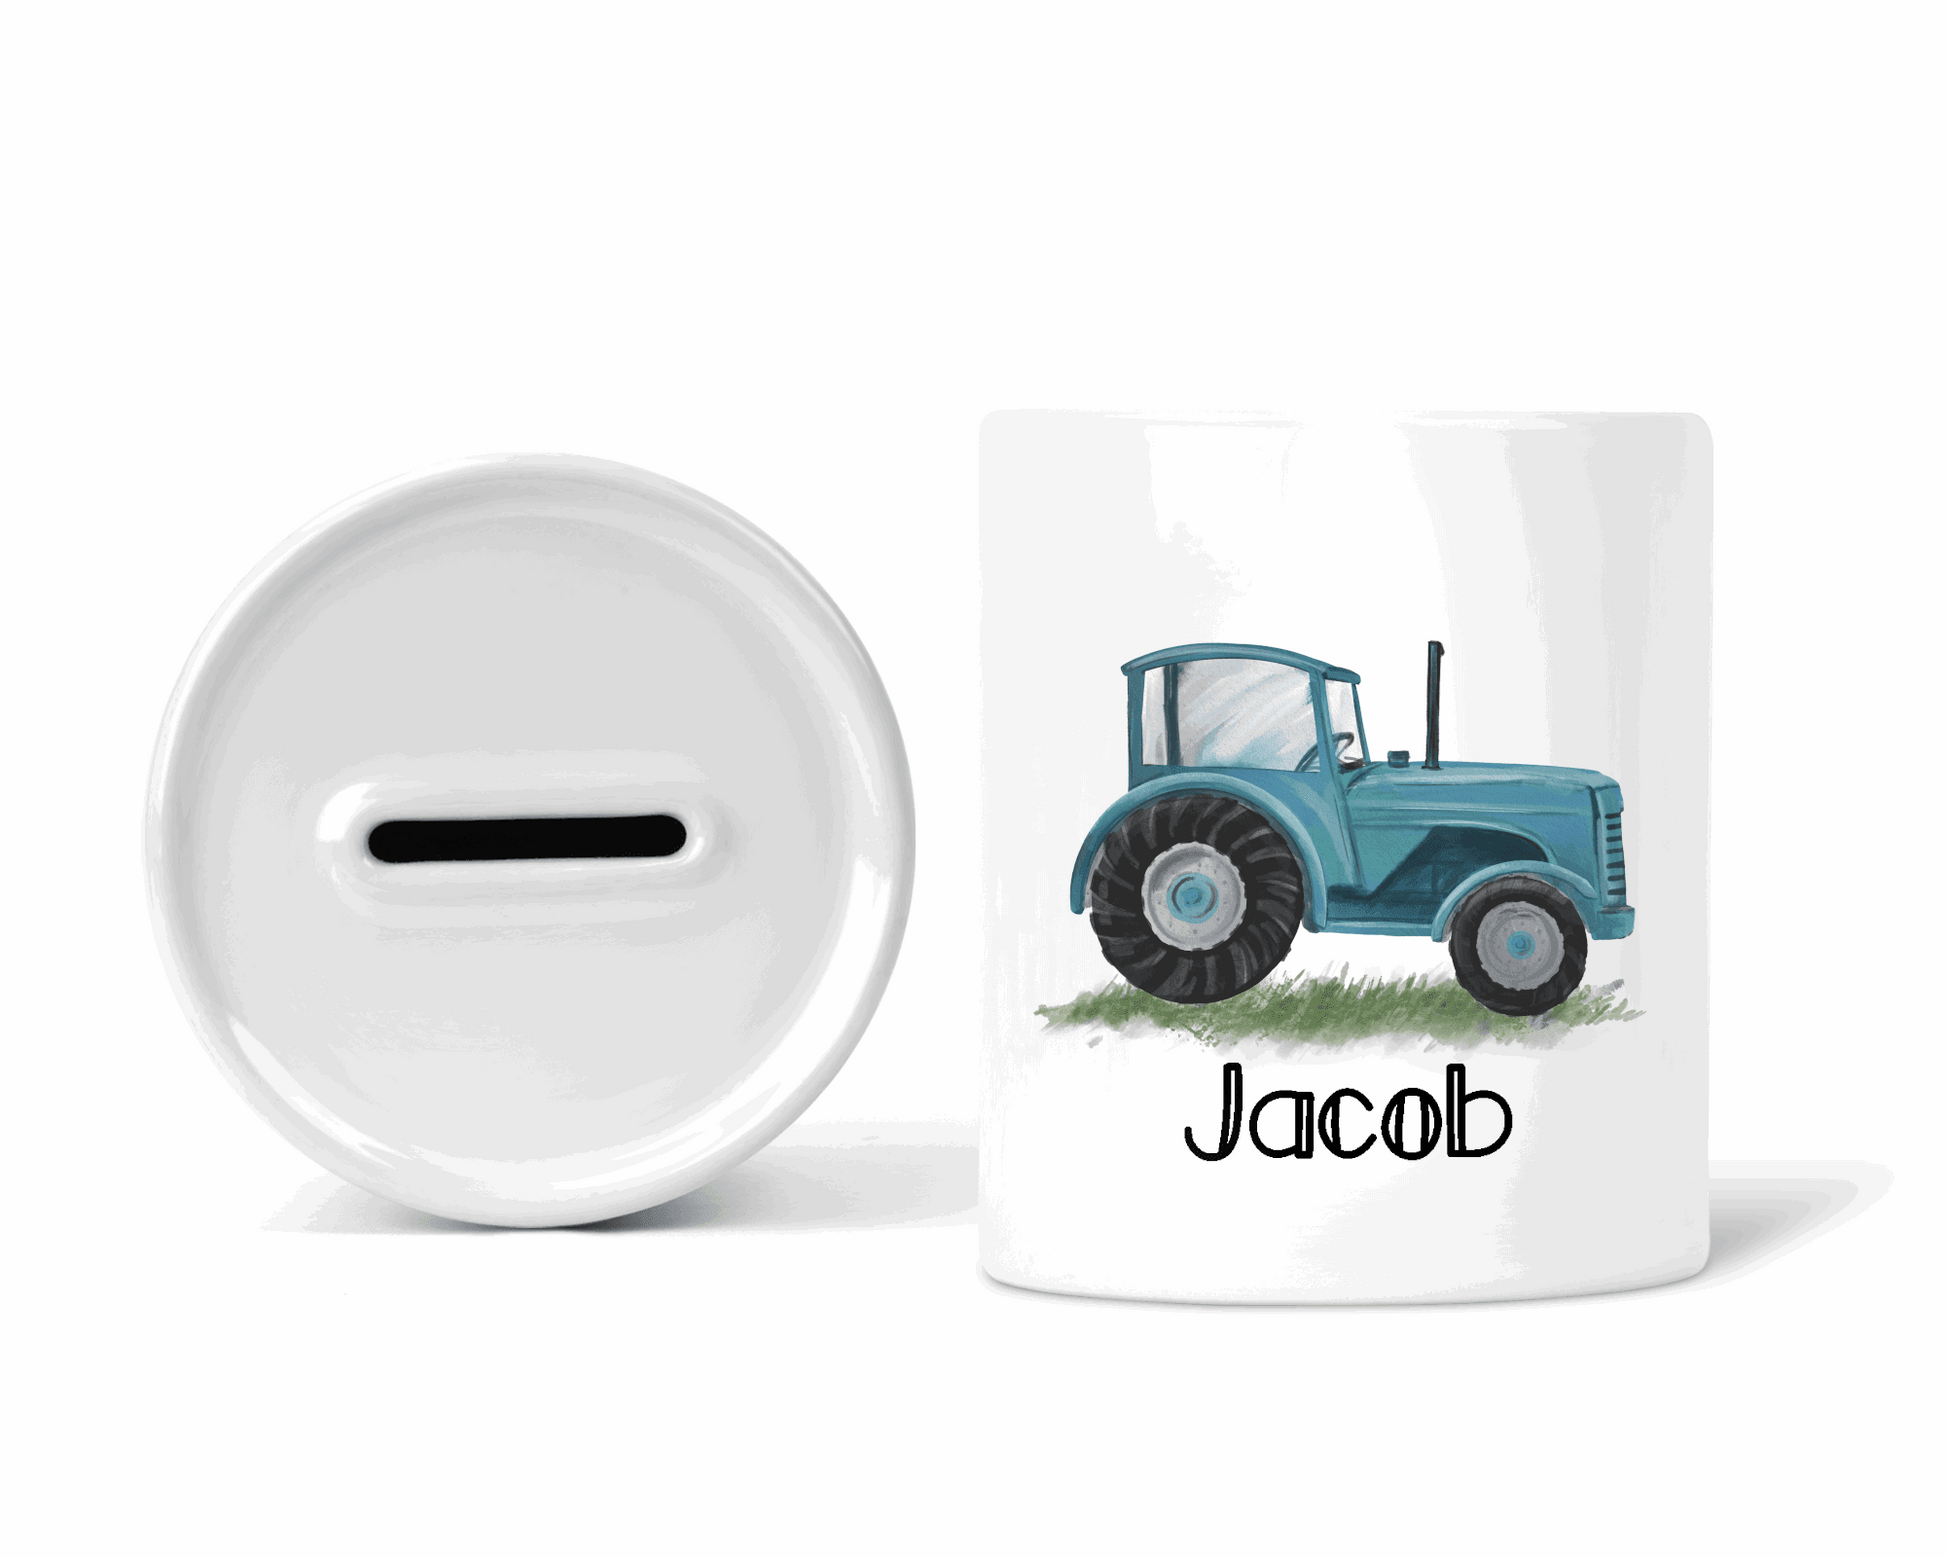 Blue tractor personalised money box - gift ideas - ceramic money box - moose and goose gifts